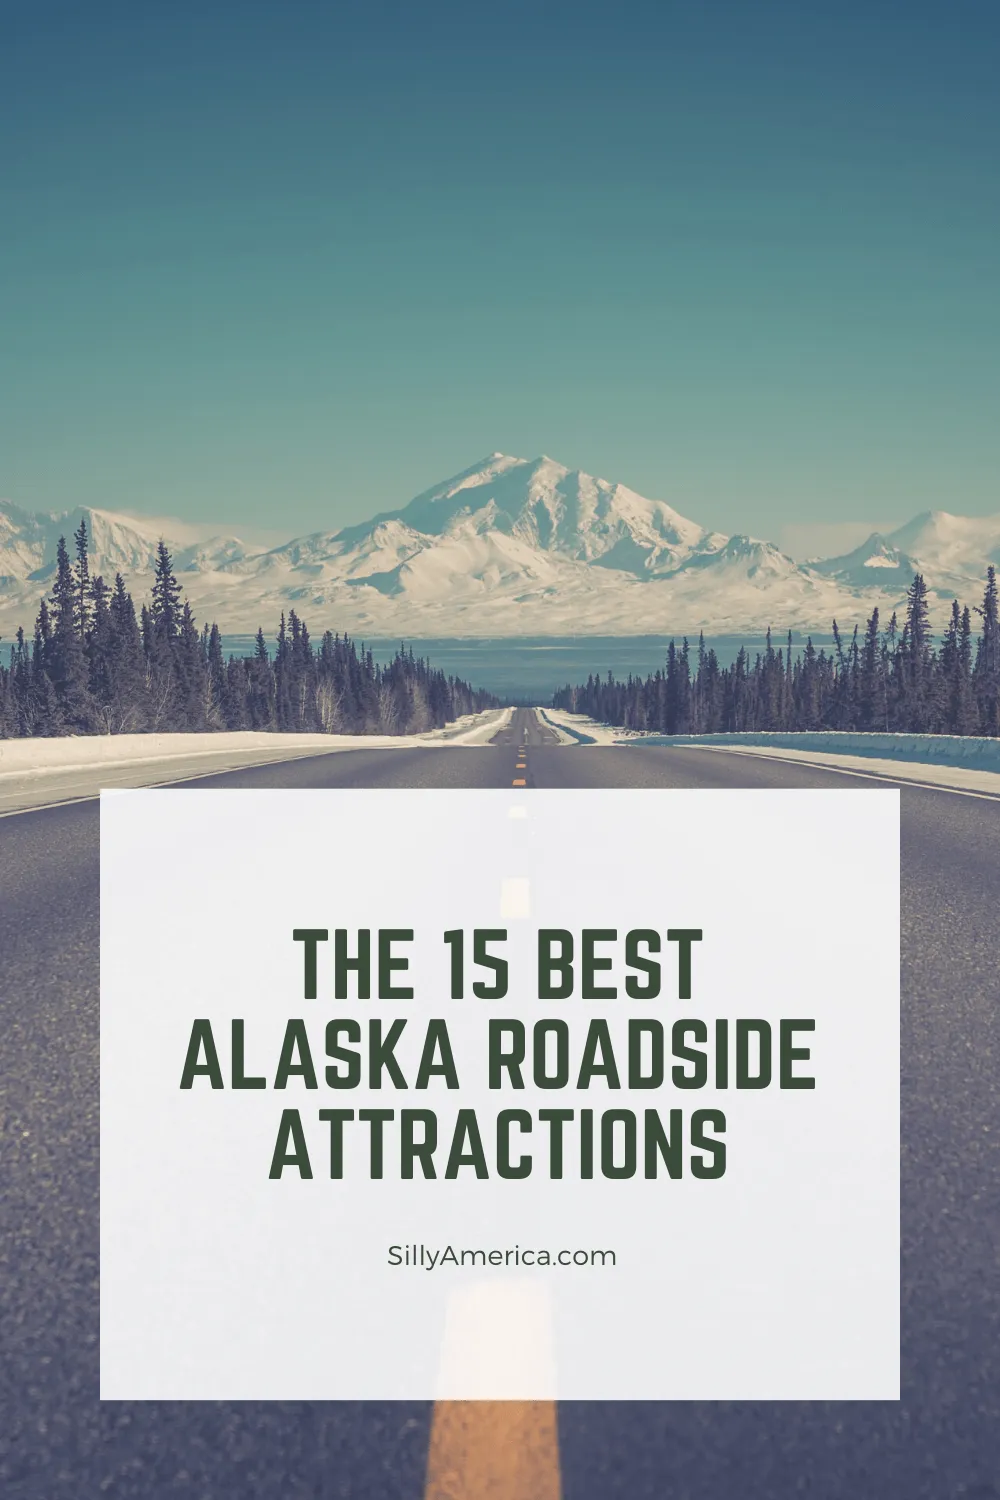 The best Alaska roadside attractions to visit on an Alaska road trip. Add these roadside oddities to your travel bucket list, itinerary, or route map! Fun road trip stops for kids or adults. #AlaskaRoadTrip #AlaskaRoadTripMap #RoadTripMap #SummerRoadTrip #AlaskaSummer #AlaskaRoadTripItinerary #AlaskaItinerary #RoadTrip #RoadsideAttraction #RoadsideAttractions #AlaskaRoadsideAttractions #AlaskaRoadsideAttraction #AlaskaRoadTripStops